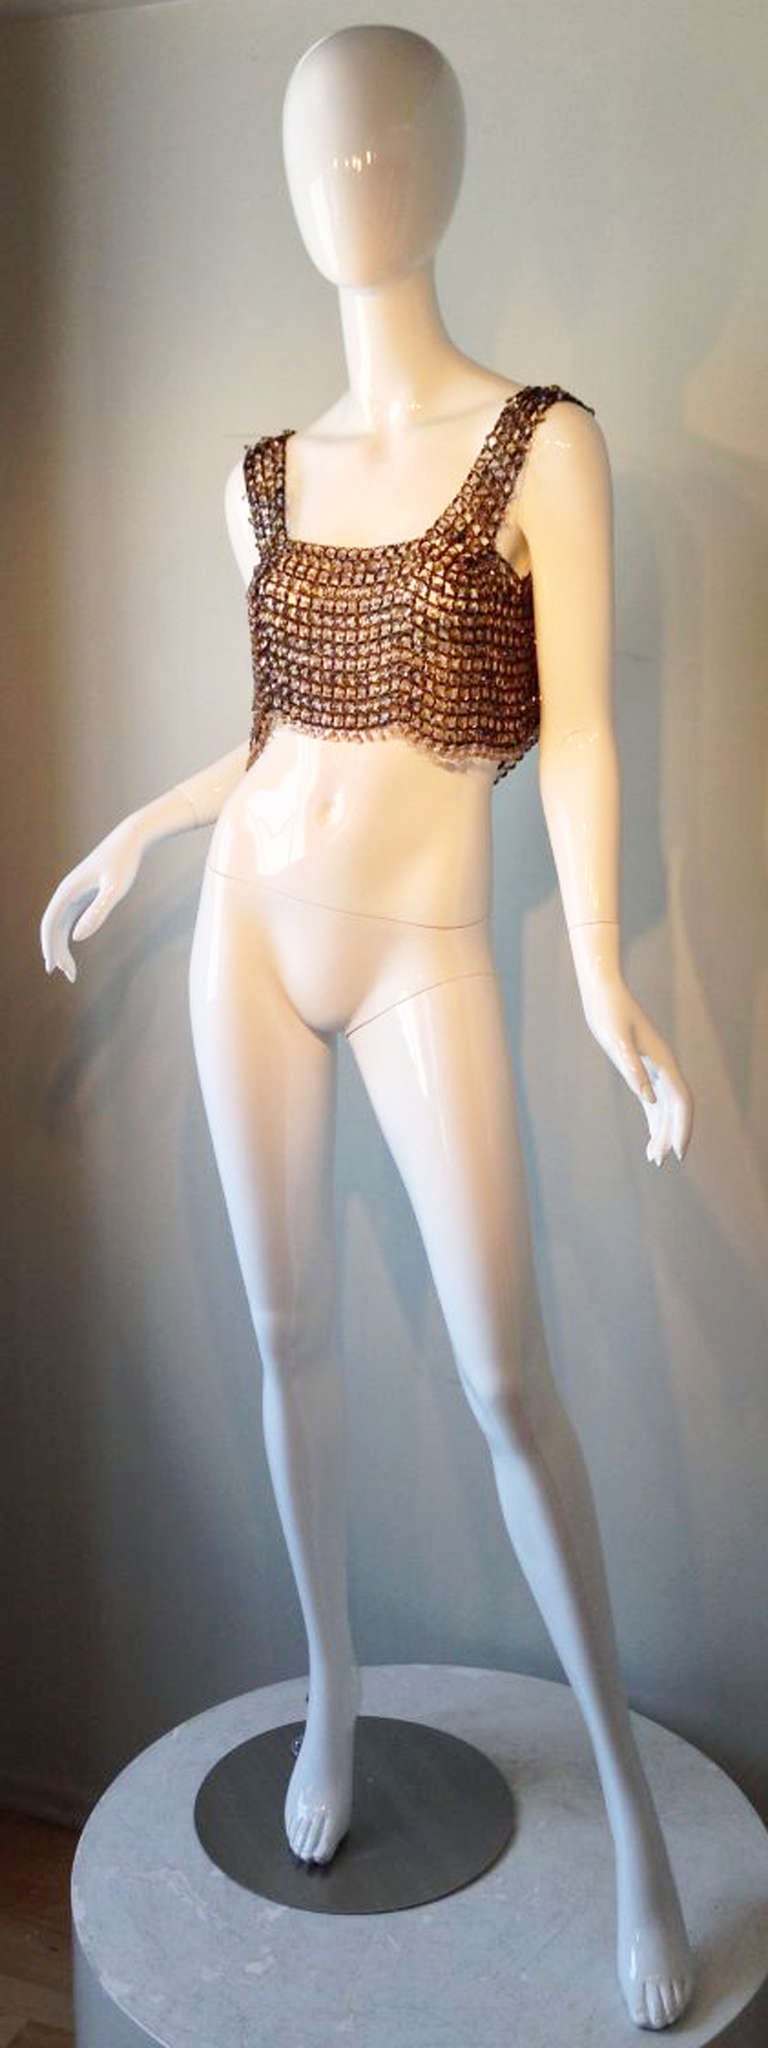 A exquisite and rare vintage Halston crystal chain link evening bodice. Gun-metal chain linked item completely covered in champagne colored crystals. Item features hook back closures back. Unlabeled. Pristine.